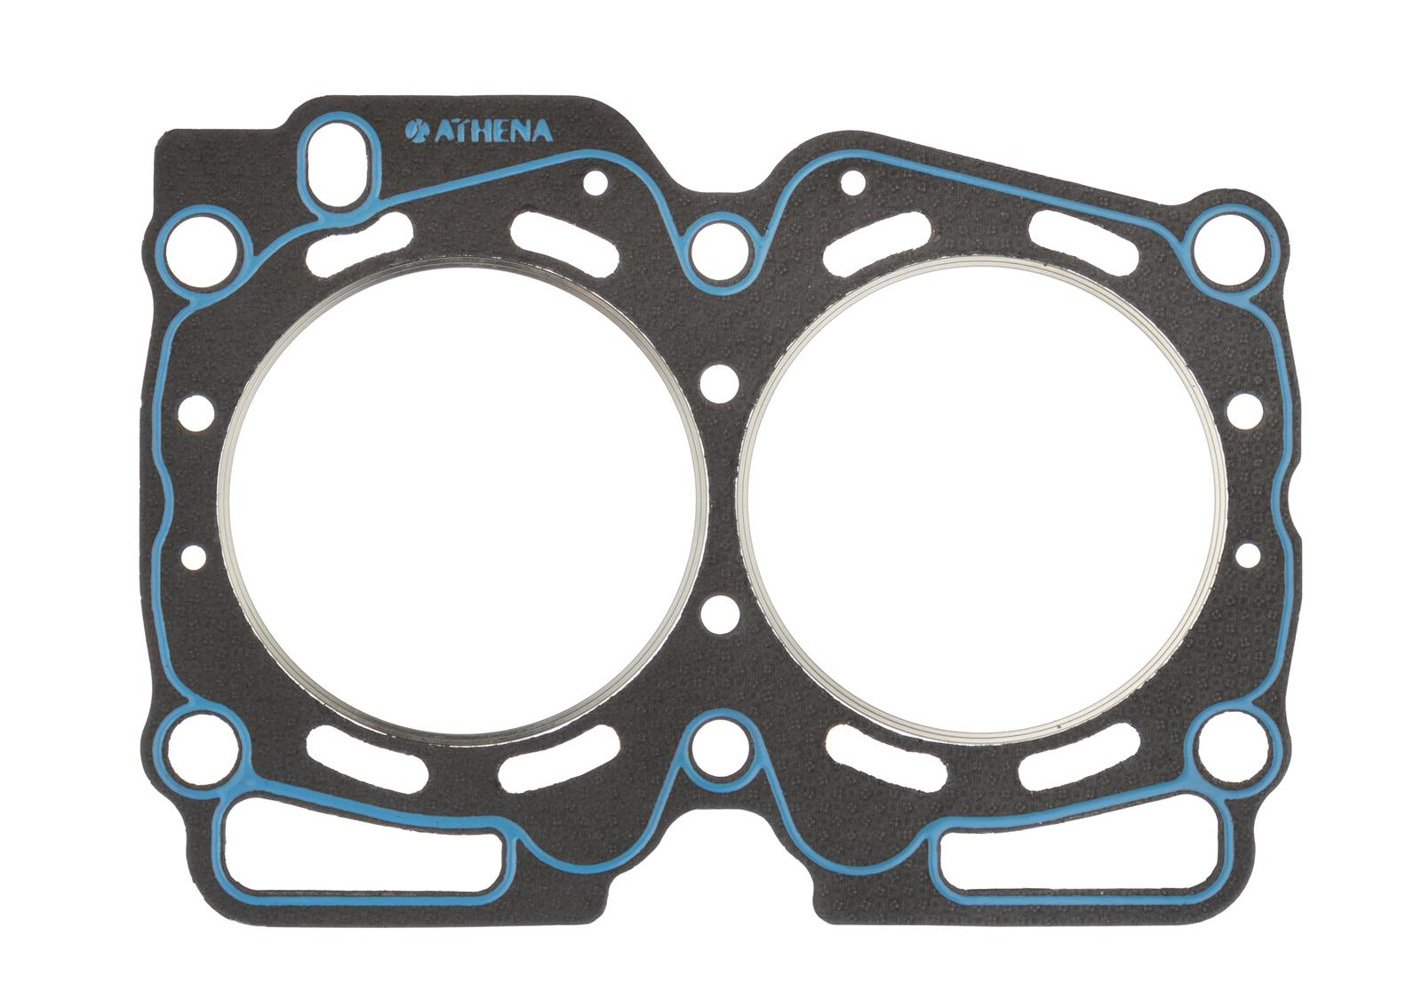 SCE Gaskets CR330076 - Cylinder Head Gasket, Vulcan Cut Ring, 100.00 mm Bore, 1.20 mm Compression Thickness, Steel Core Laminate, Subaru 4-Cylinder, Each